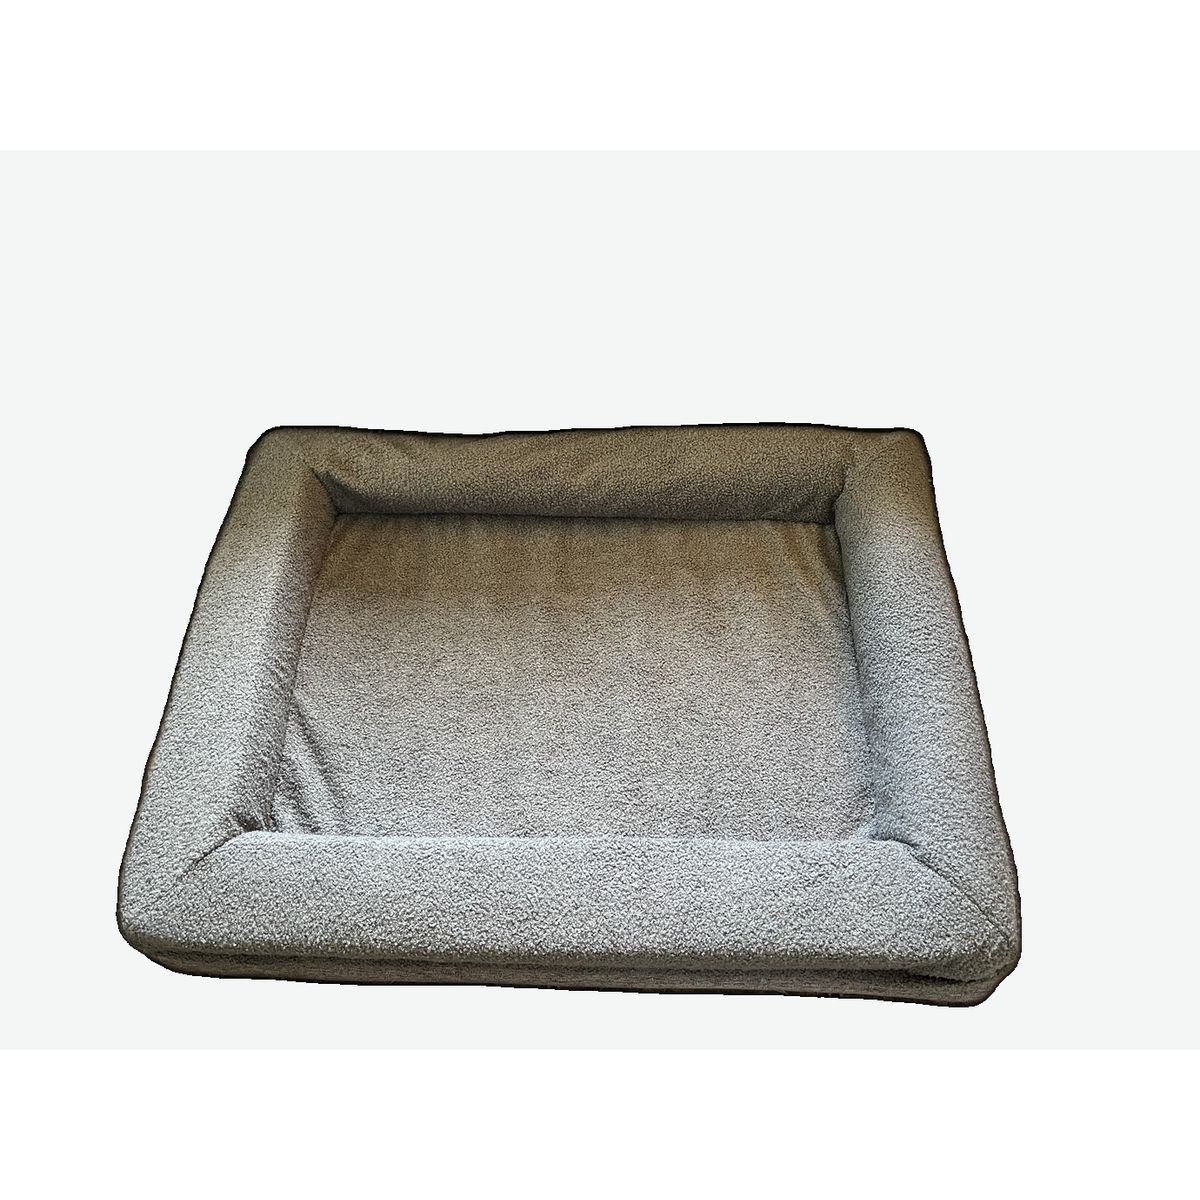 Photos - Bed & Furniture Private Label Microplush Orthopedic Bolstered Pet Bed - Bolstered Square P